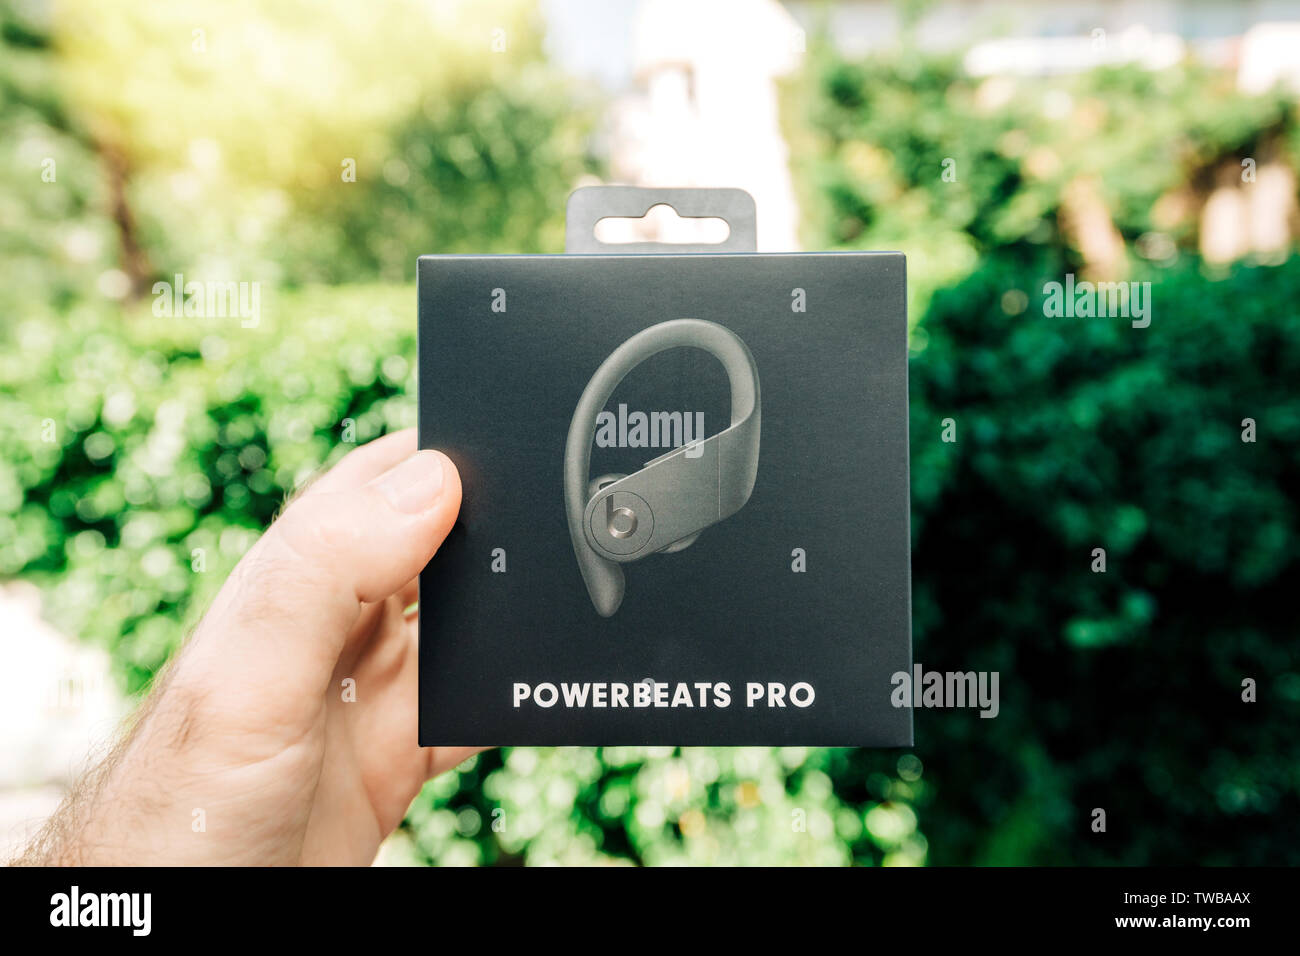 Paris, France - Jun 17, 2019: Man hand holding against green park background Powerbeats Pro Beats by Dr Dre wireless high-performance earphones waterproof and workout professional headphones Stock Photo